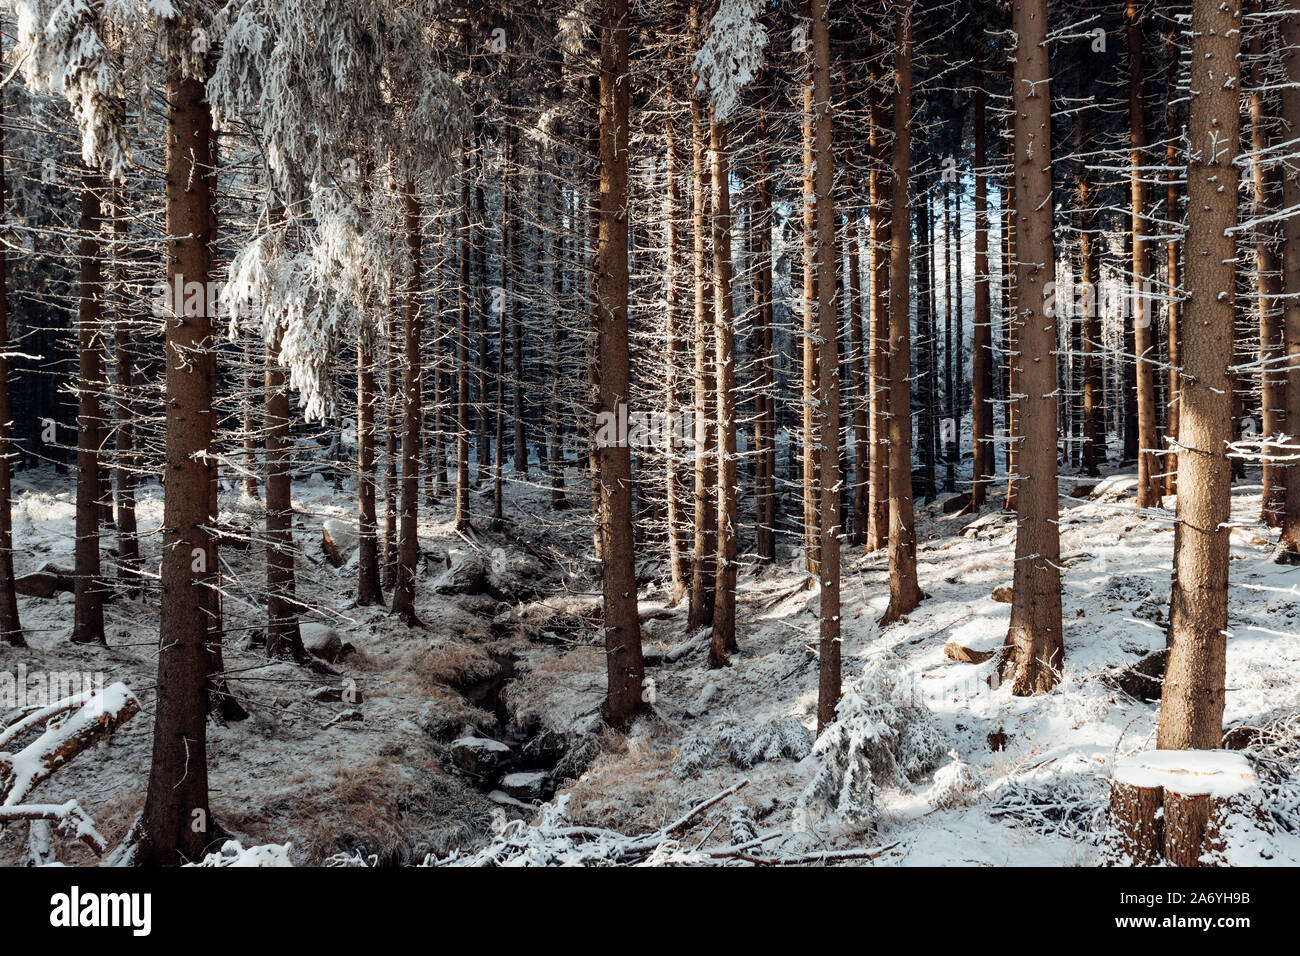 Snowy wintry coniferous forest in the Harz mountains Stock Photo